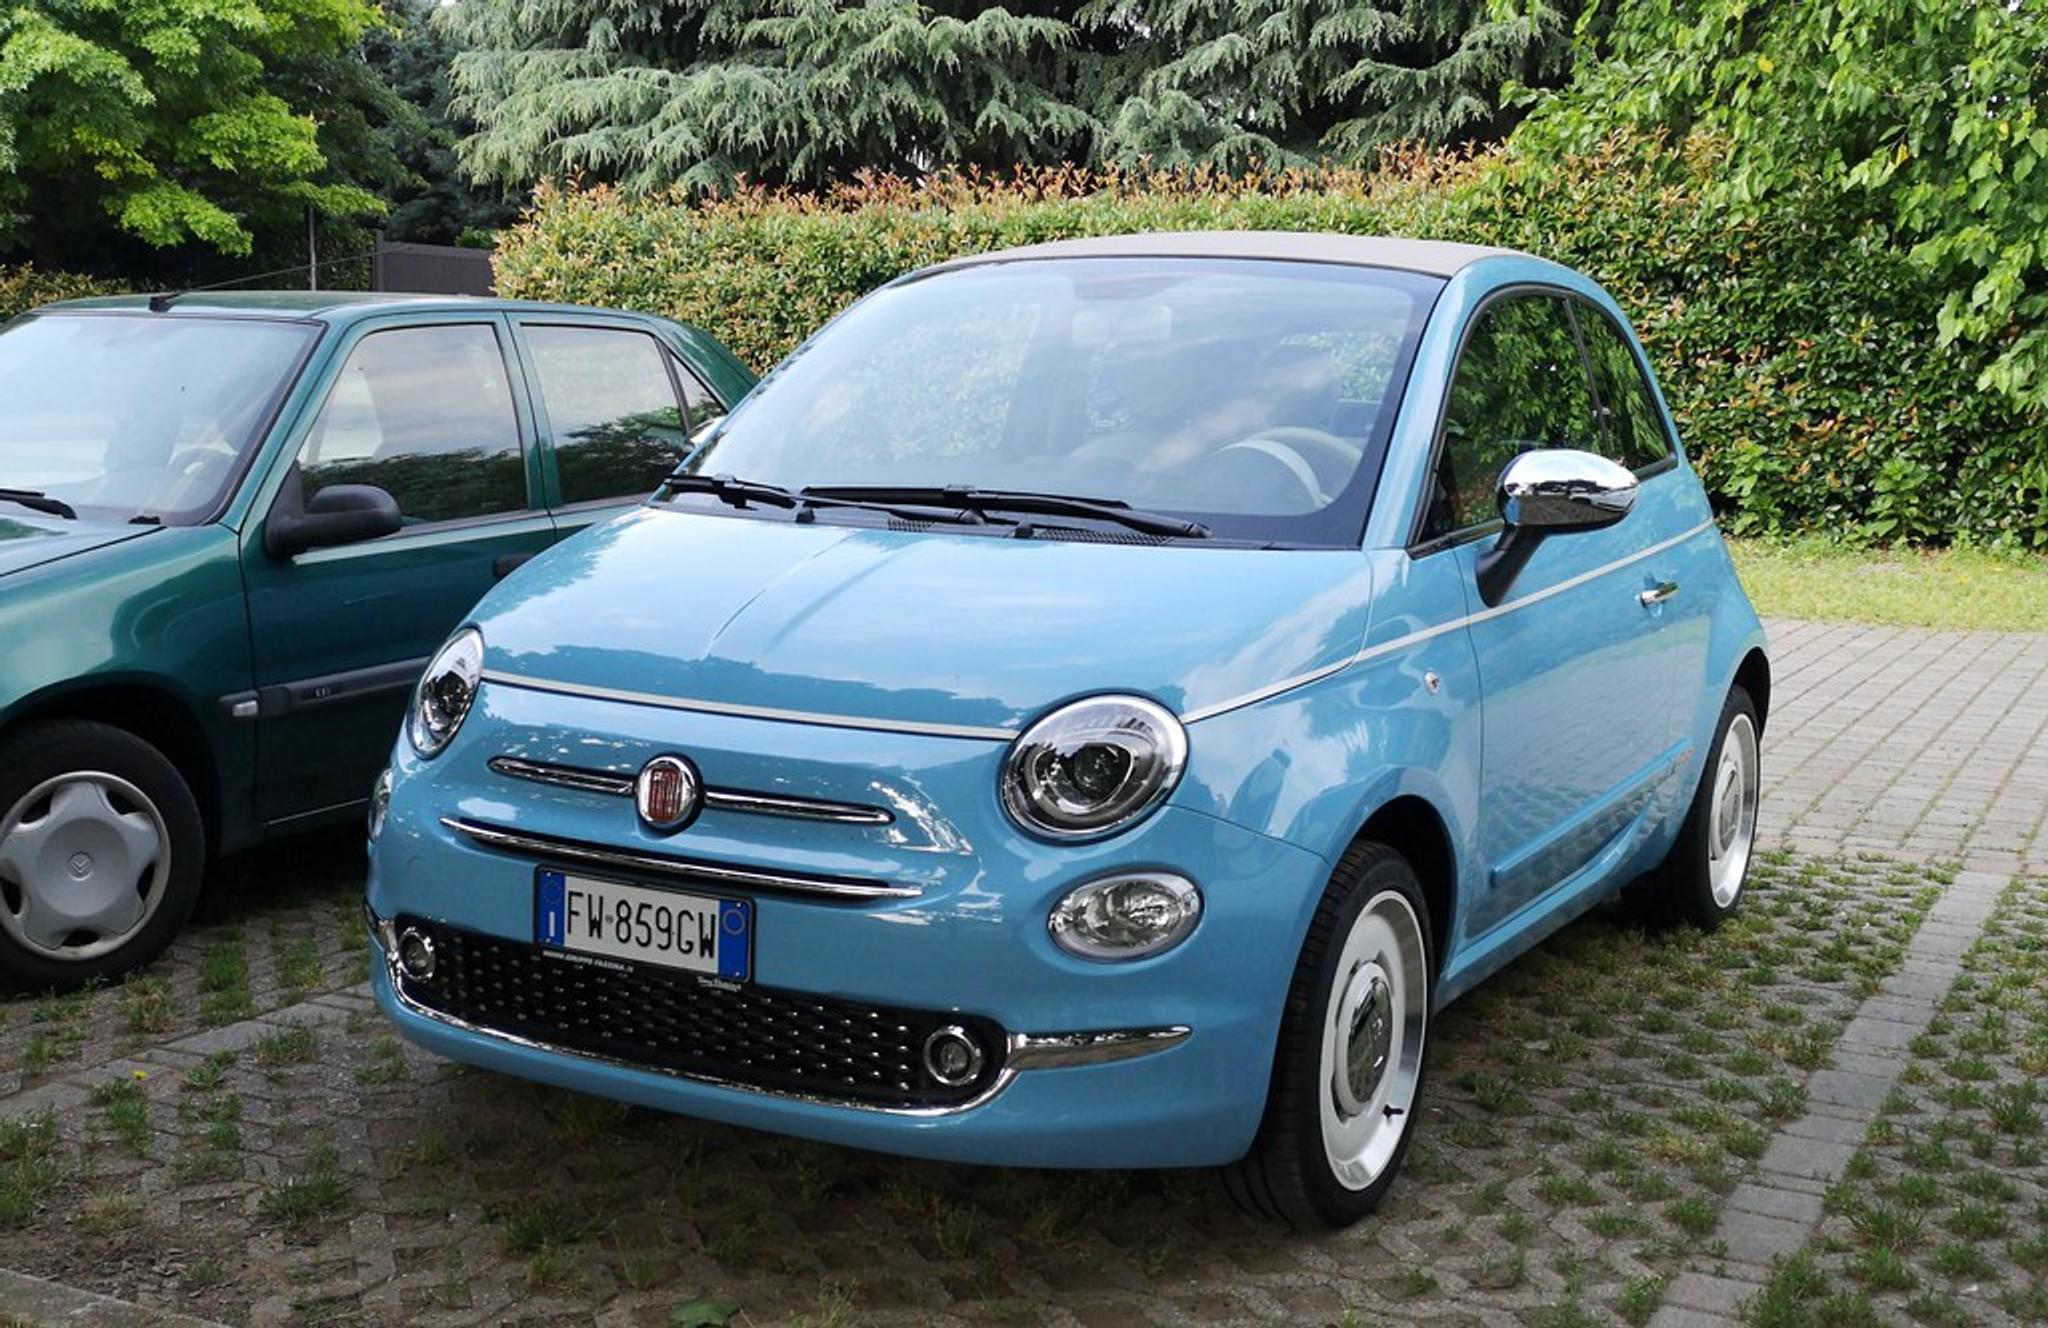 Light blue Fiat 500 with white rims